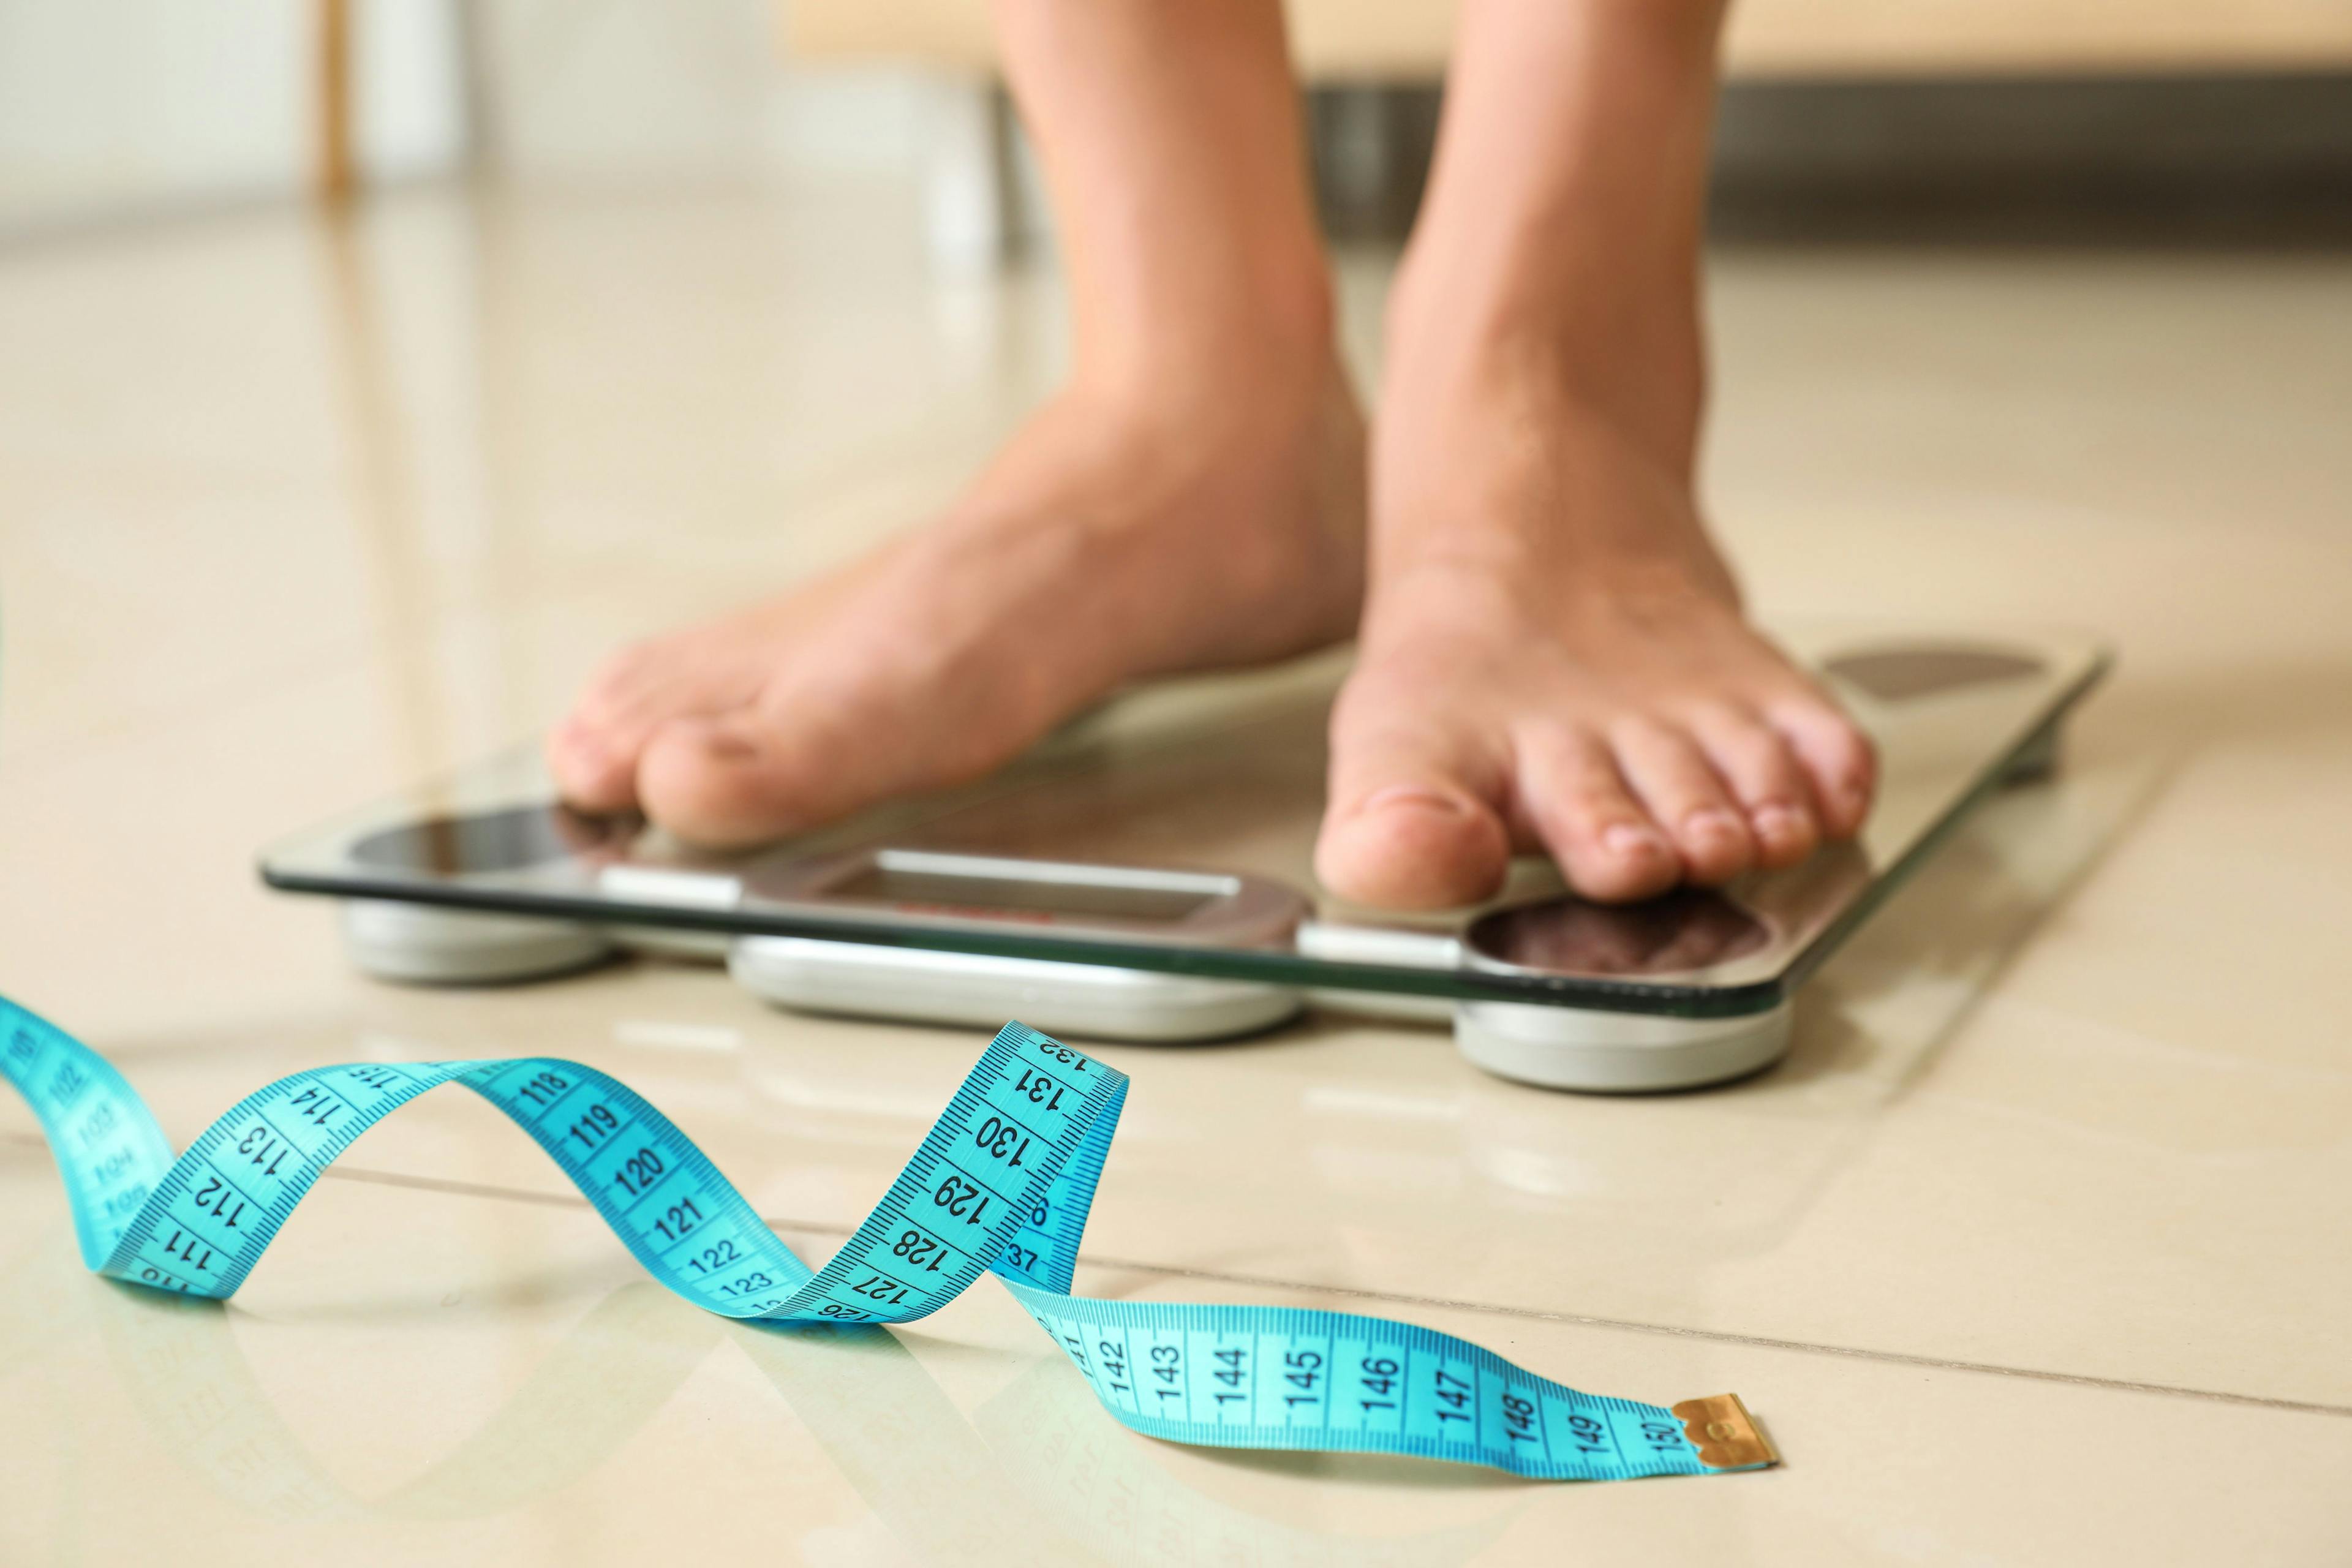 Current Perceptions Affect Managed Care of Obesity as Chronic Condition